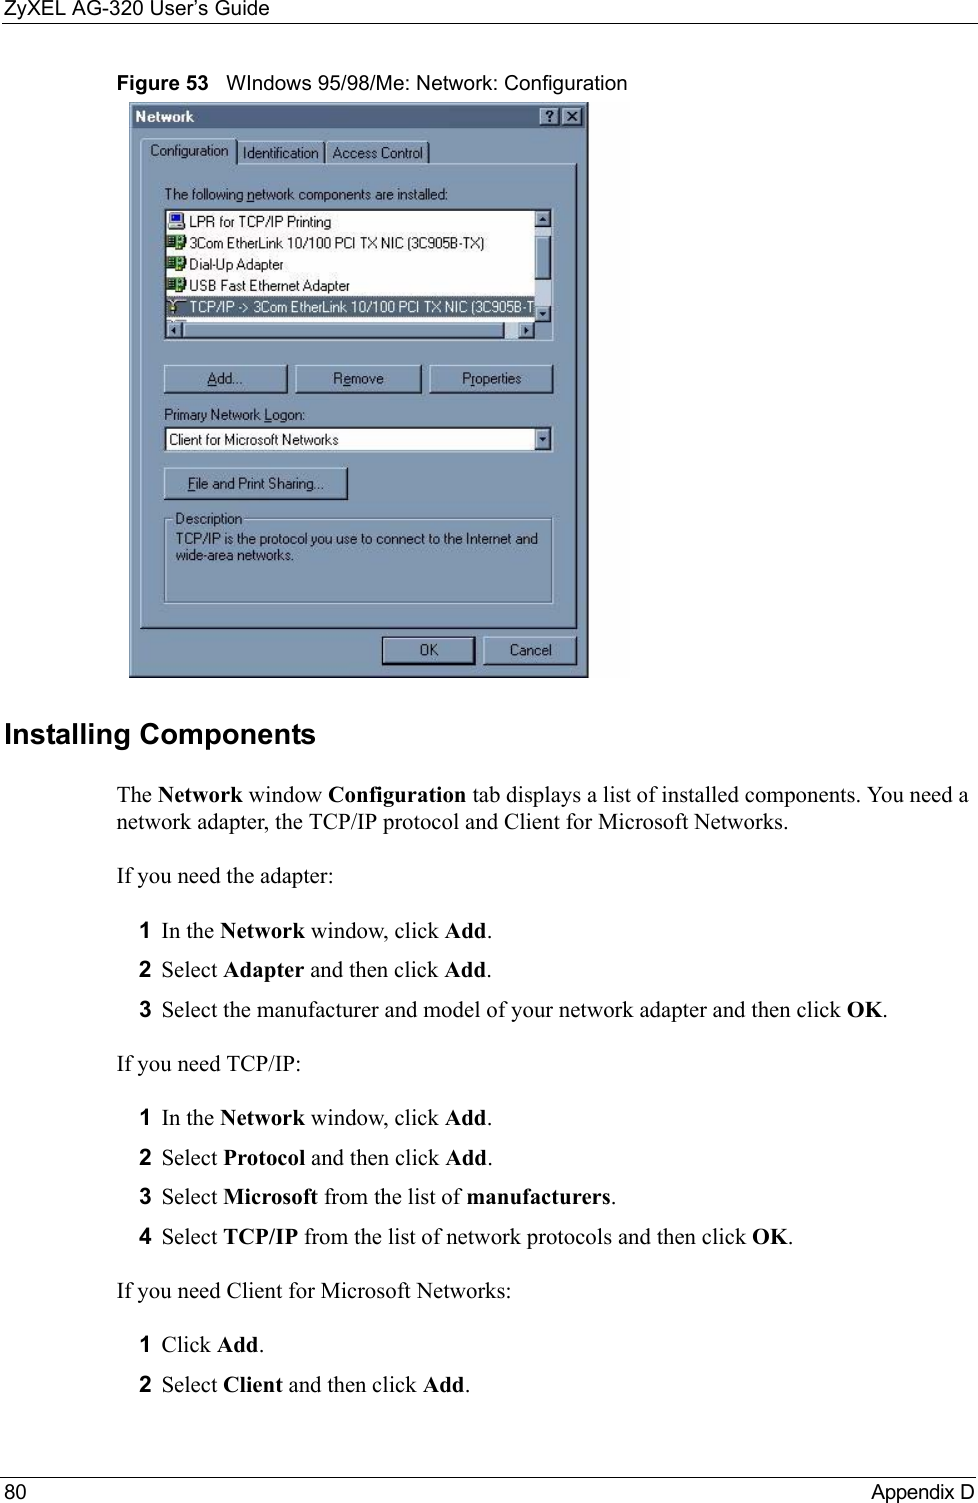 ZyXEL AG-320 User’s Guide80 Appendix DFigure 53   WIndows 95/98/Me: Network: ConfigurationInstalling ComponentsThe Network window Configuration tab displays a list of installed components. You need a network adapter, the TCP/IP protocol and Client for Microsoft Networks.If you need the adapter:1In the Network window, click Add.2Select Adapter and then click Add.3Select the manufacturer and model of your network adapter and then click OK.If you need TCP/IP:1In the Network window, click Add.2Select Protocol and then click Add.3Select Microsoft from the list of manufacturers.4Select TCP/IP from the list of network protocols and then click OK.If you need Client for Microsoft Networks:1Click Add.2Select Client and then click Add.